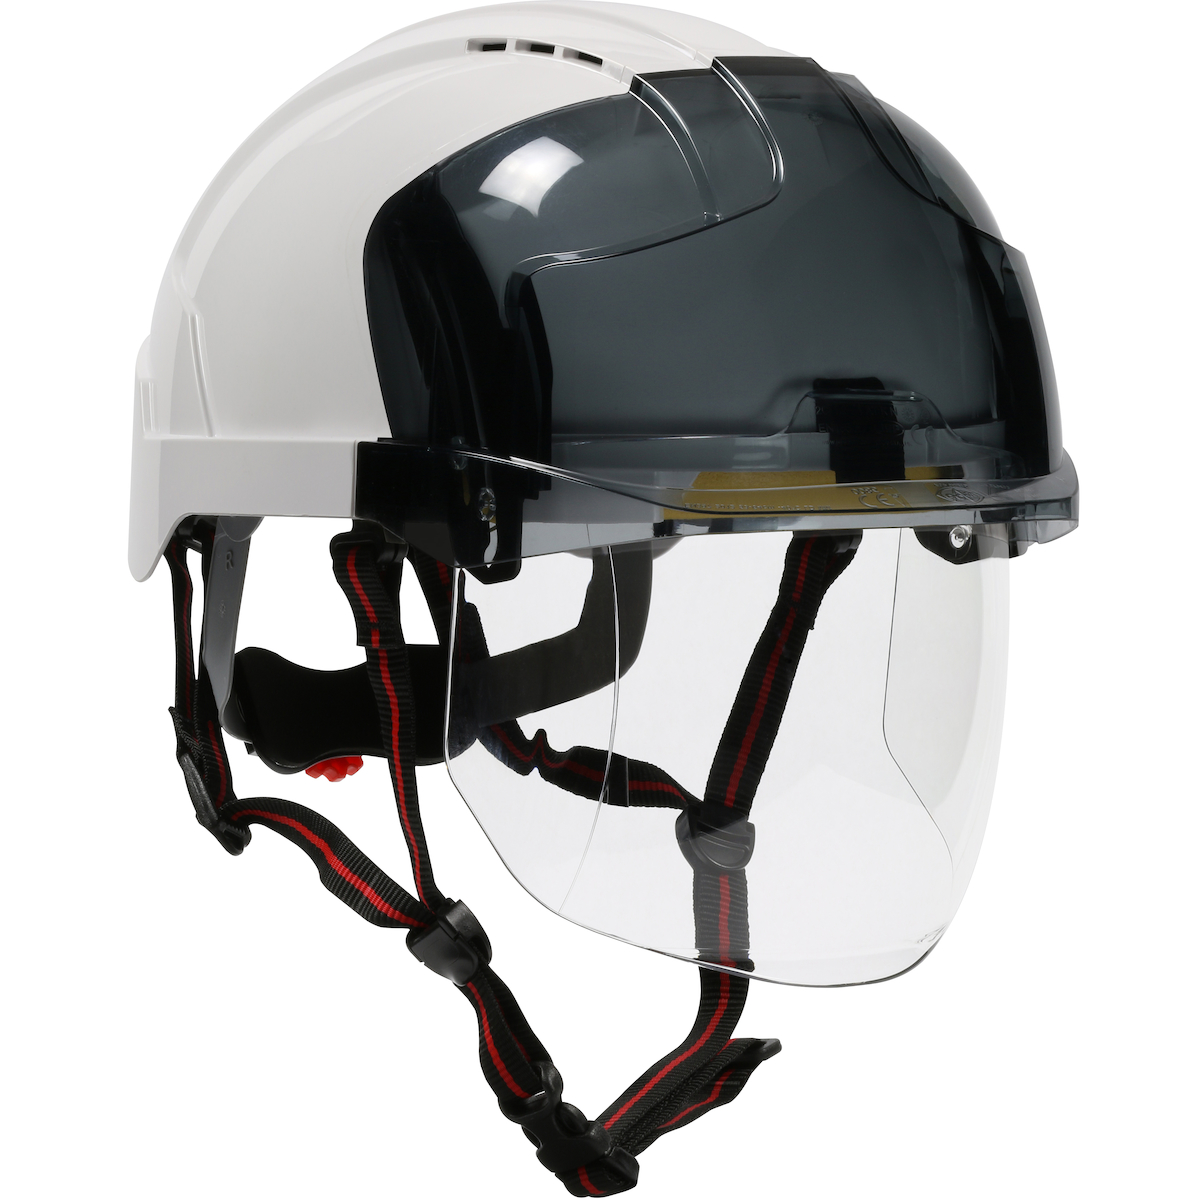 TYPE I, VENTED INDUSTRIAL SAFETY HELMET WITH FULLY ADJUSTABLE FOUR POINT CHINSTRAP, LIGHTWEIGHT ABS SHELL, INTEGRATED FACESHIELD, 6-POINT POLYESTER SUSPENSION AND WHEEL RATCHET ADJUSTMENT